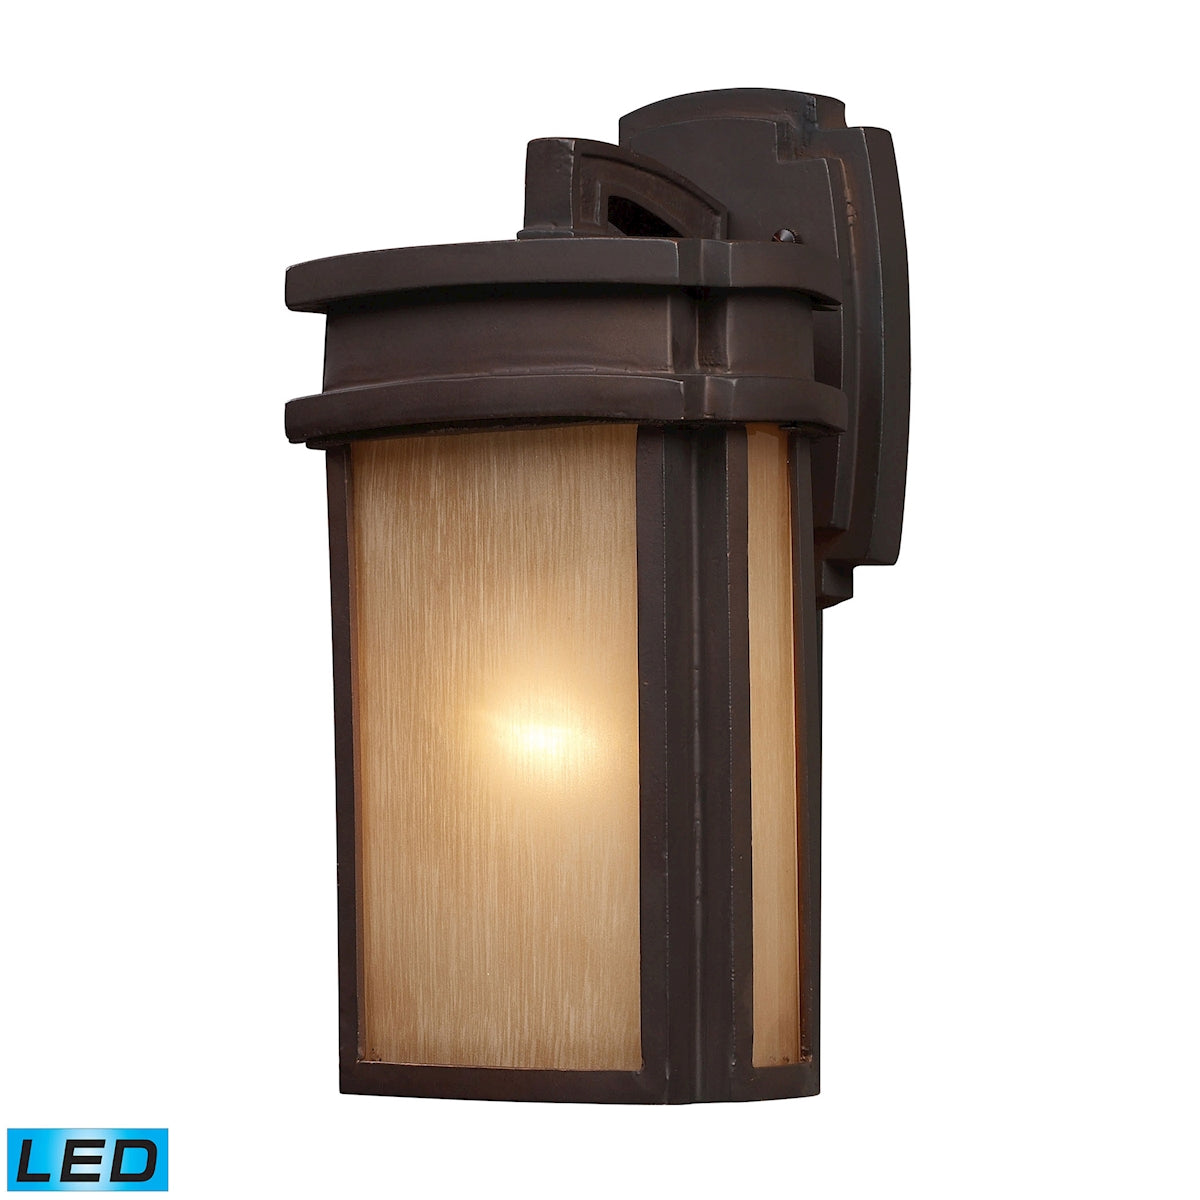 ELK Lighting 42140/1-LED Sedona 1-Light Outdoor Wall Lamp in Clay Bronze - Includes LED Bulb